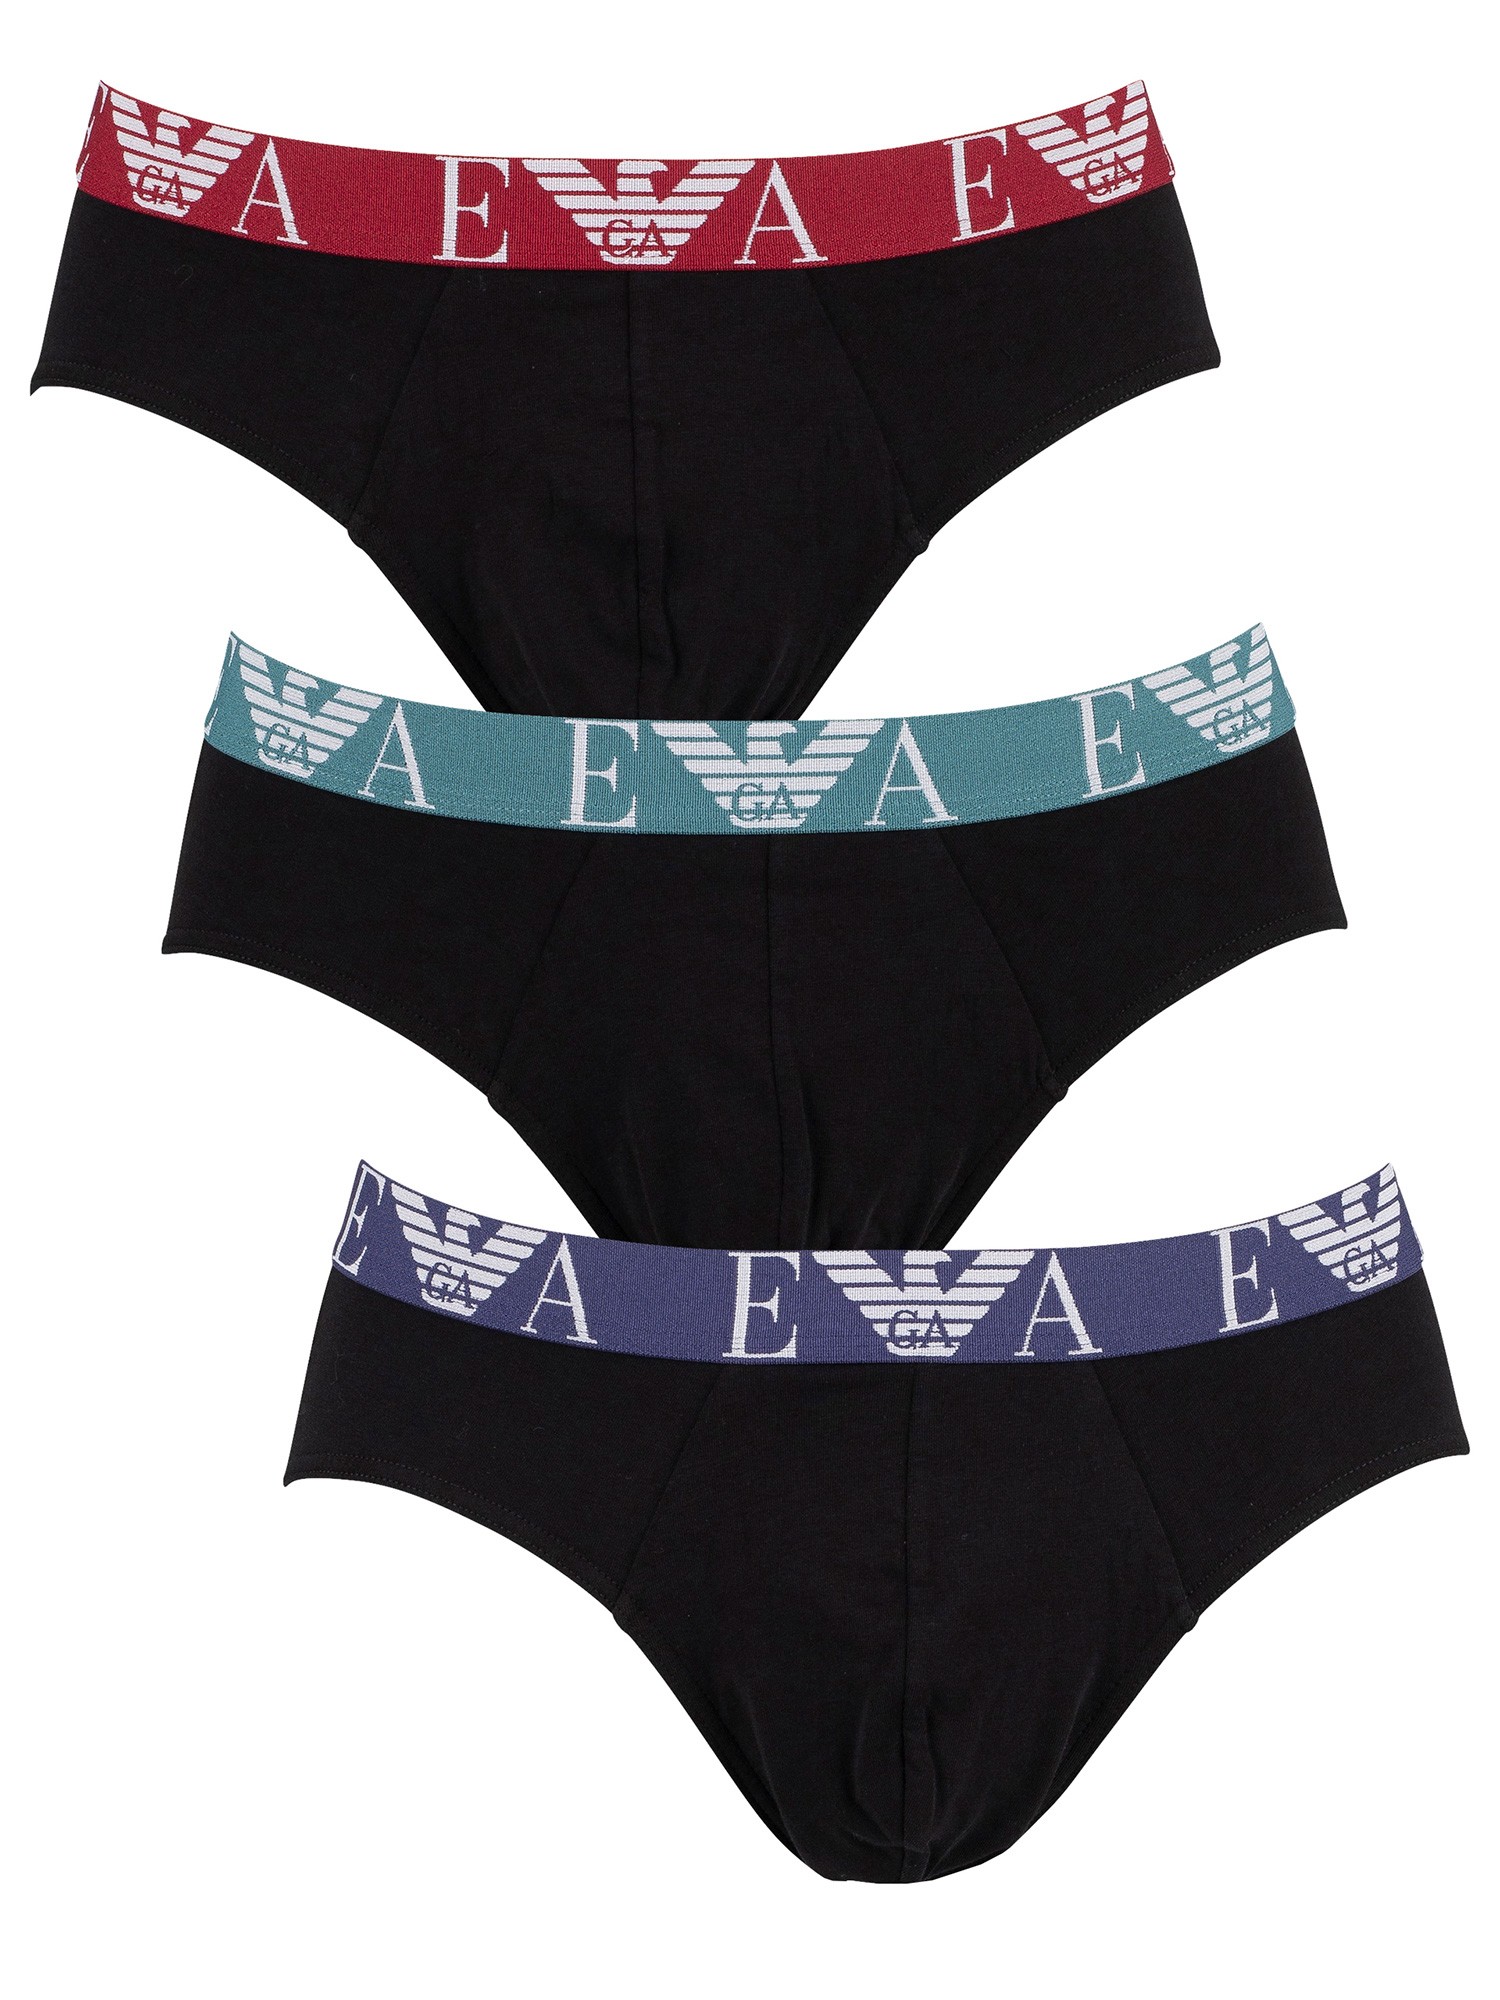 Emporio Armani 3 Pack Briefs - Red/Green/Blue | Standout